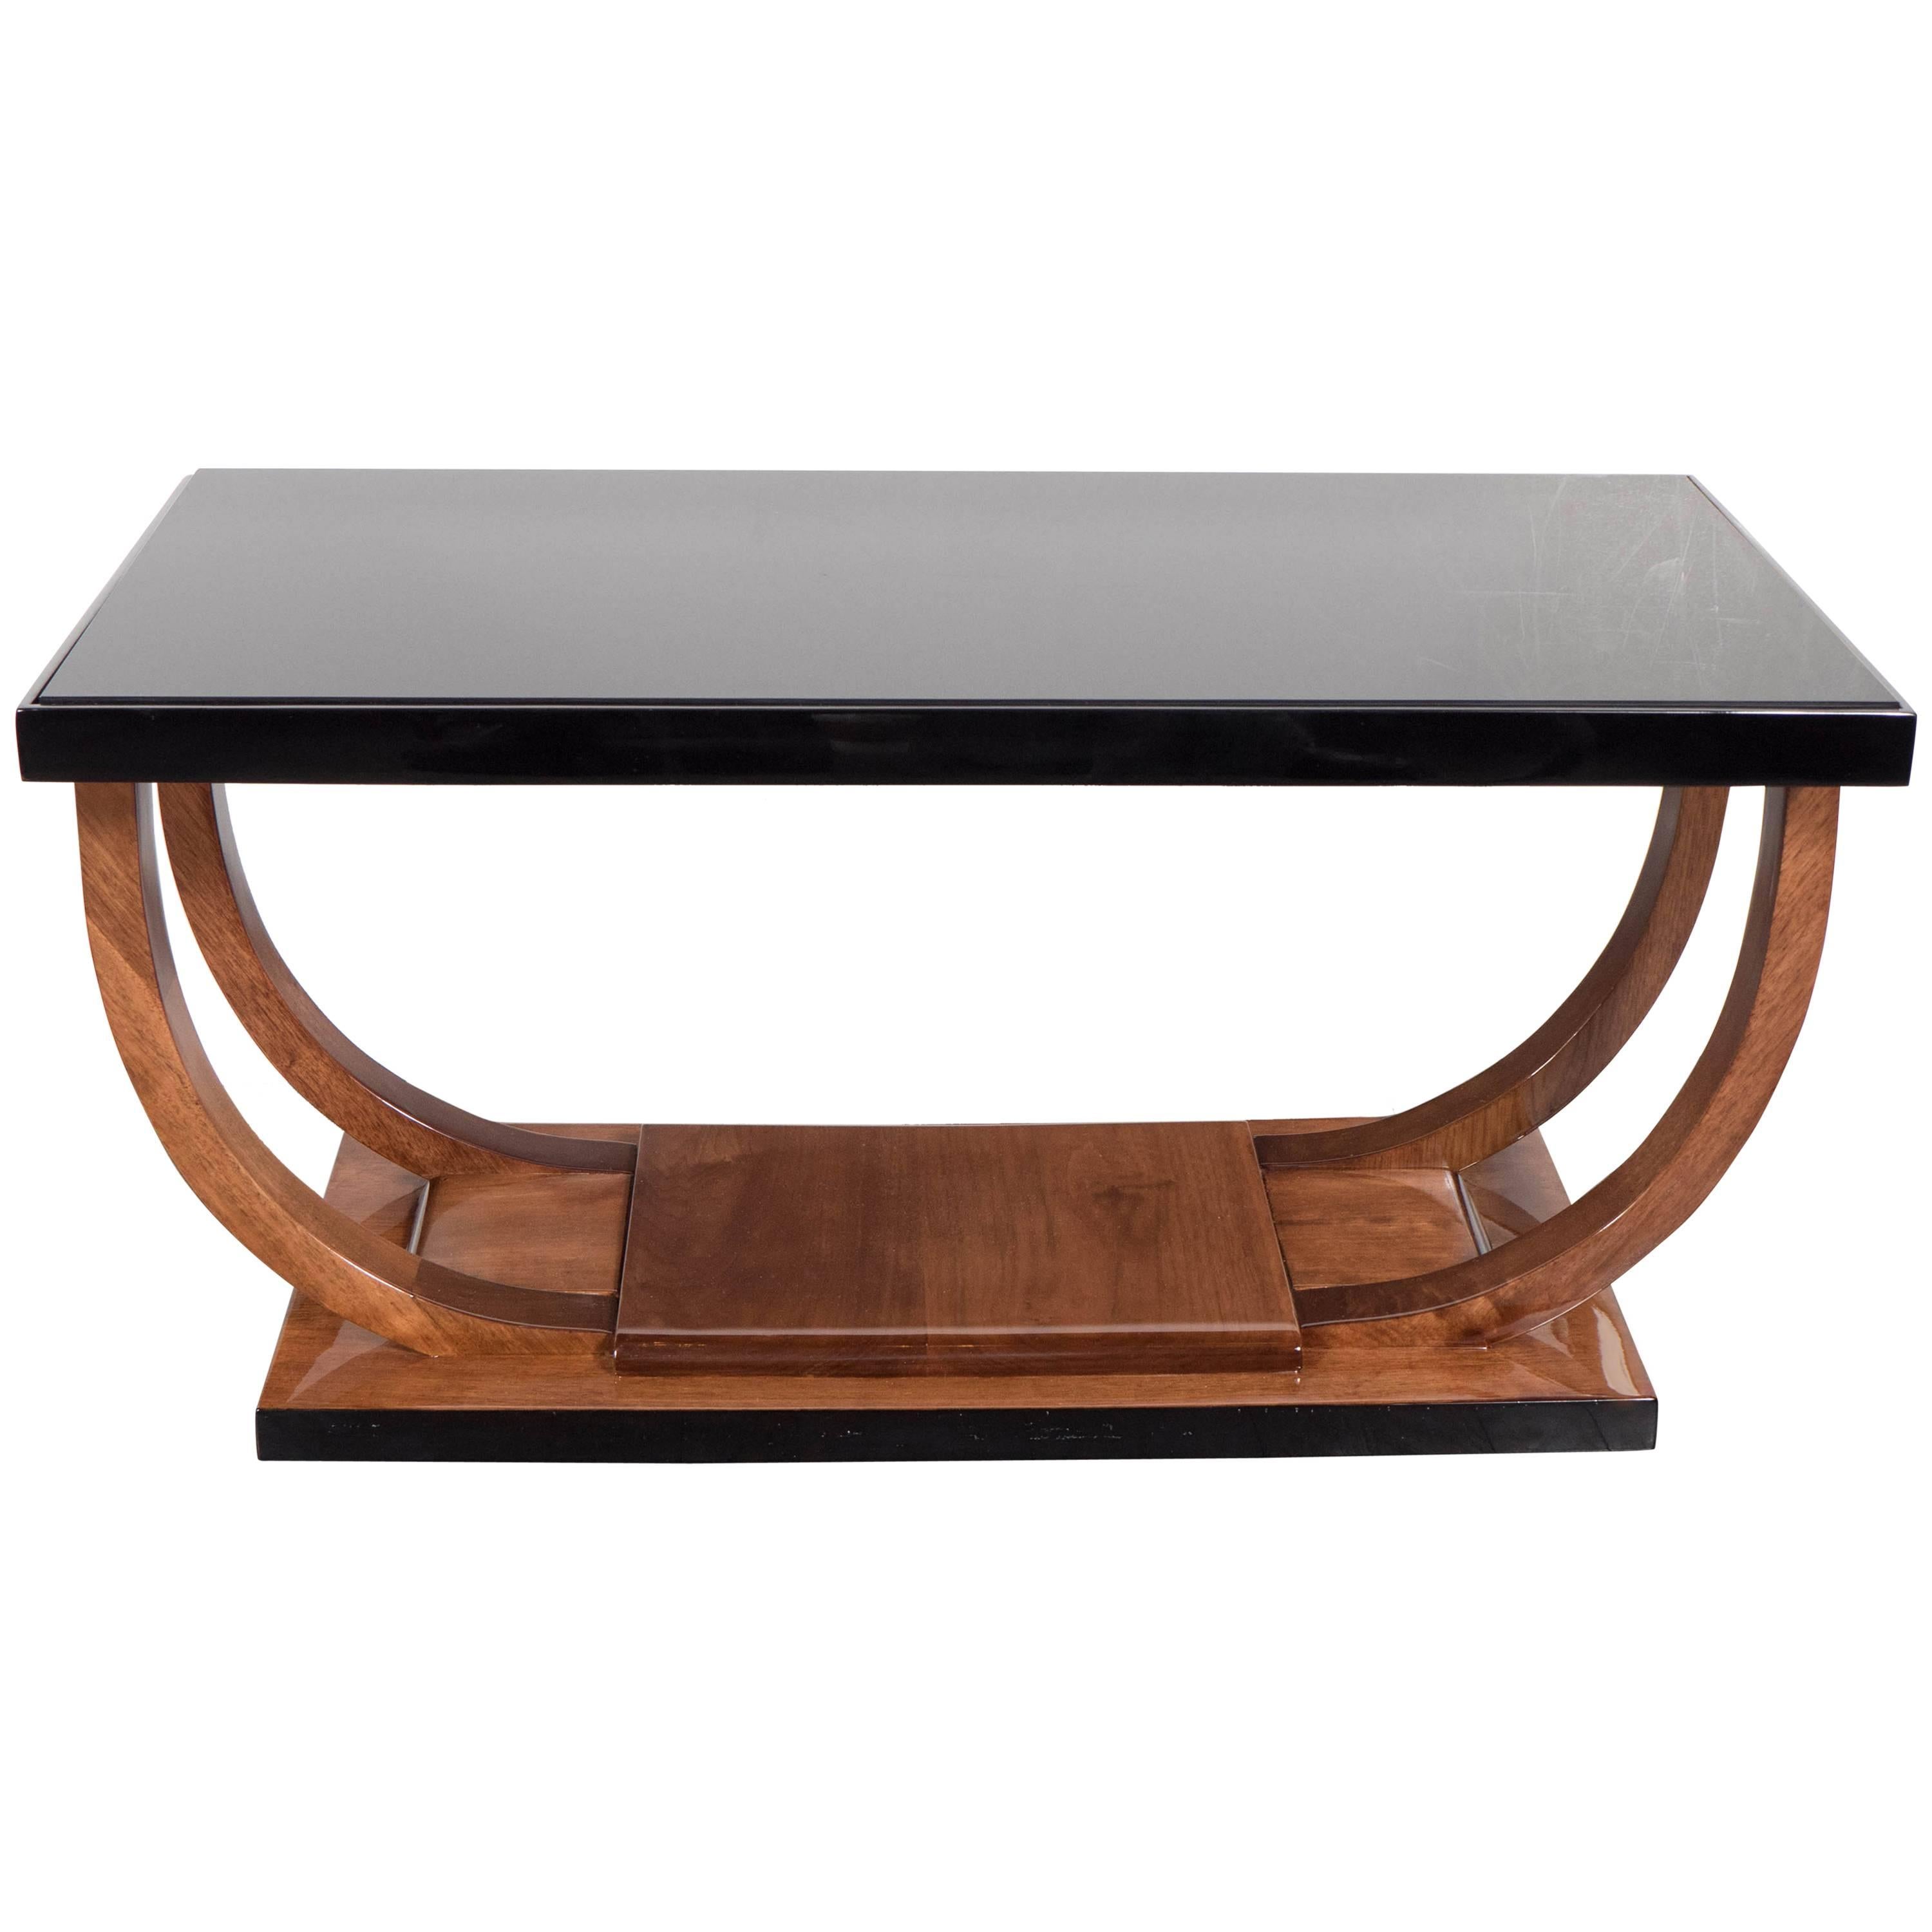 Art Deco Machine Age Streamlined Cocktail Table in Walnut and Black Lacquer